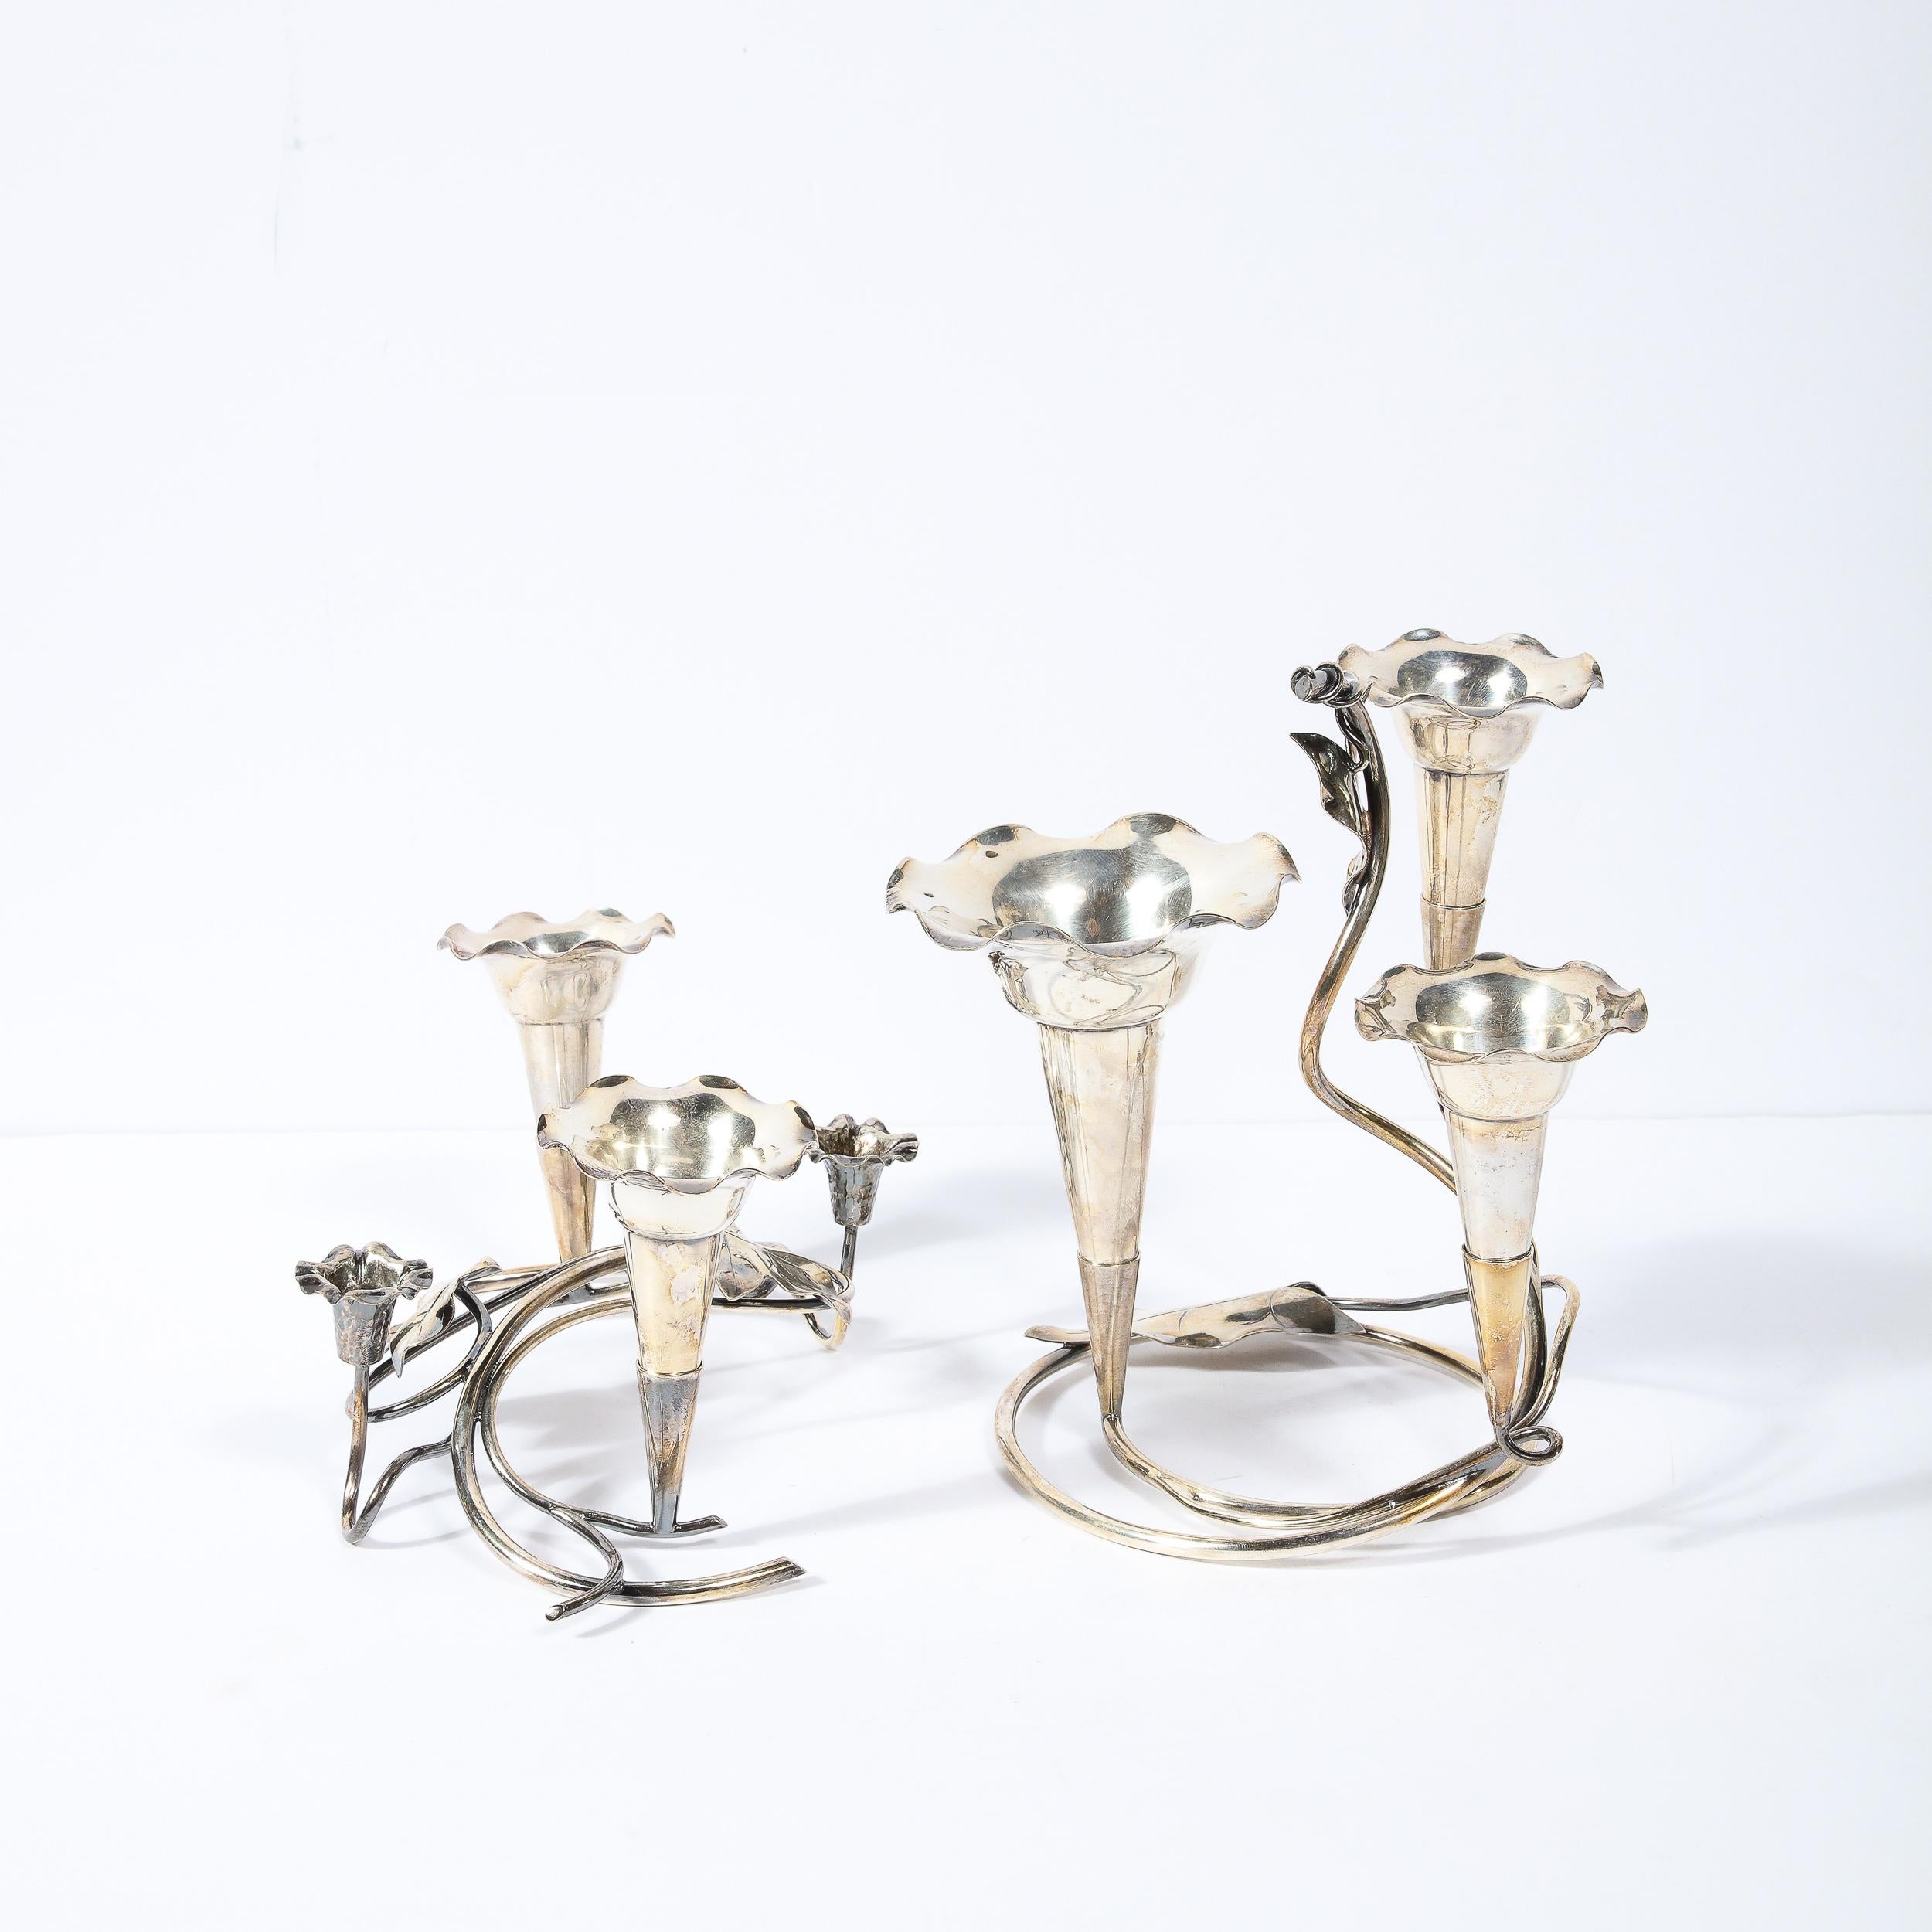 Early 20th Century Pair of Art Nouveau Silver-Plate Morning Glory Motif Candle Holders For Sale